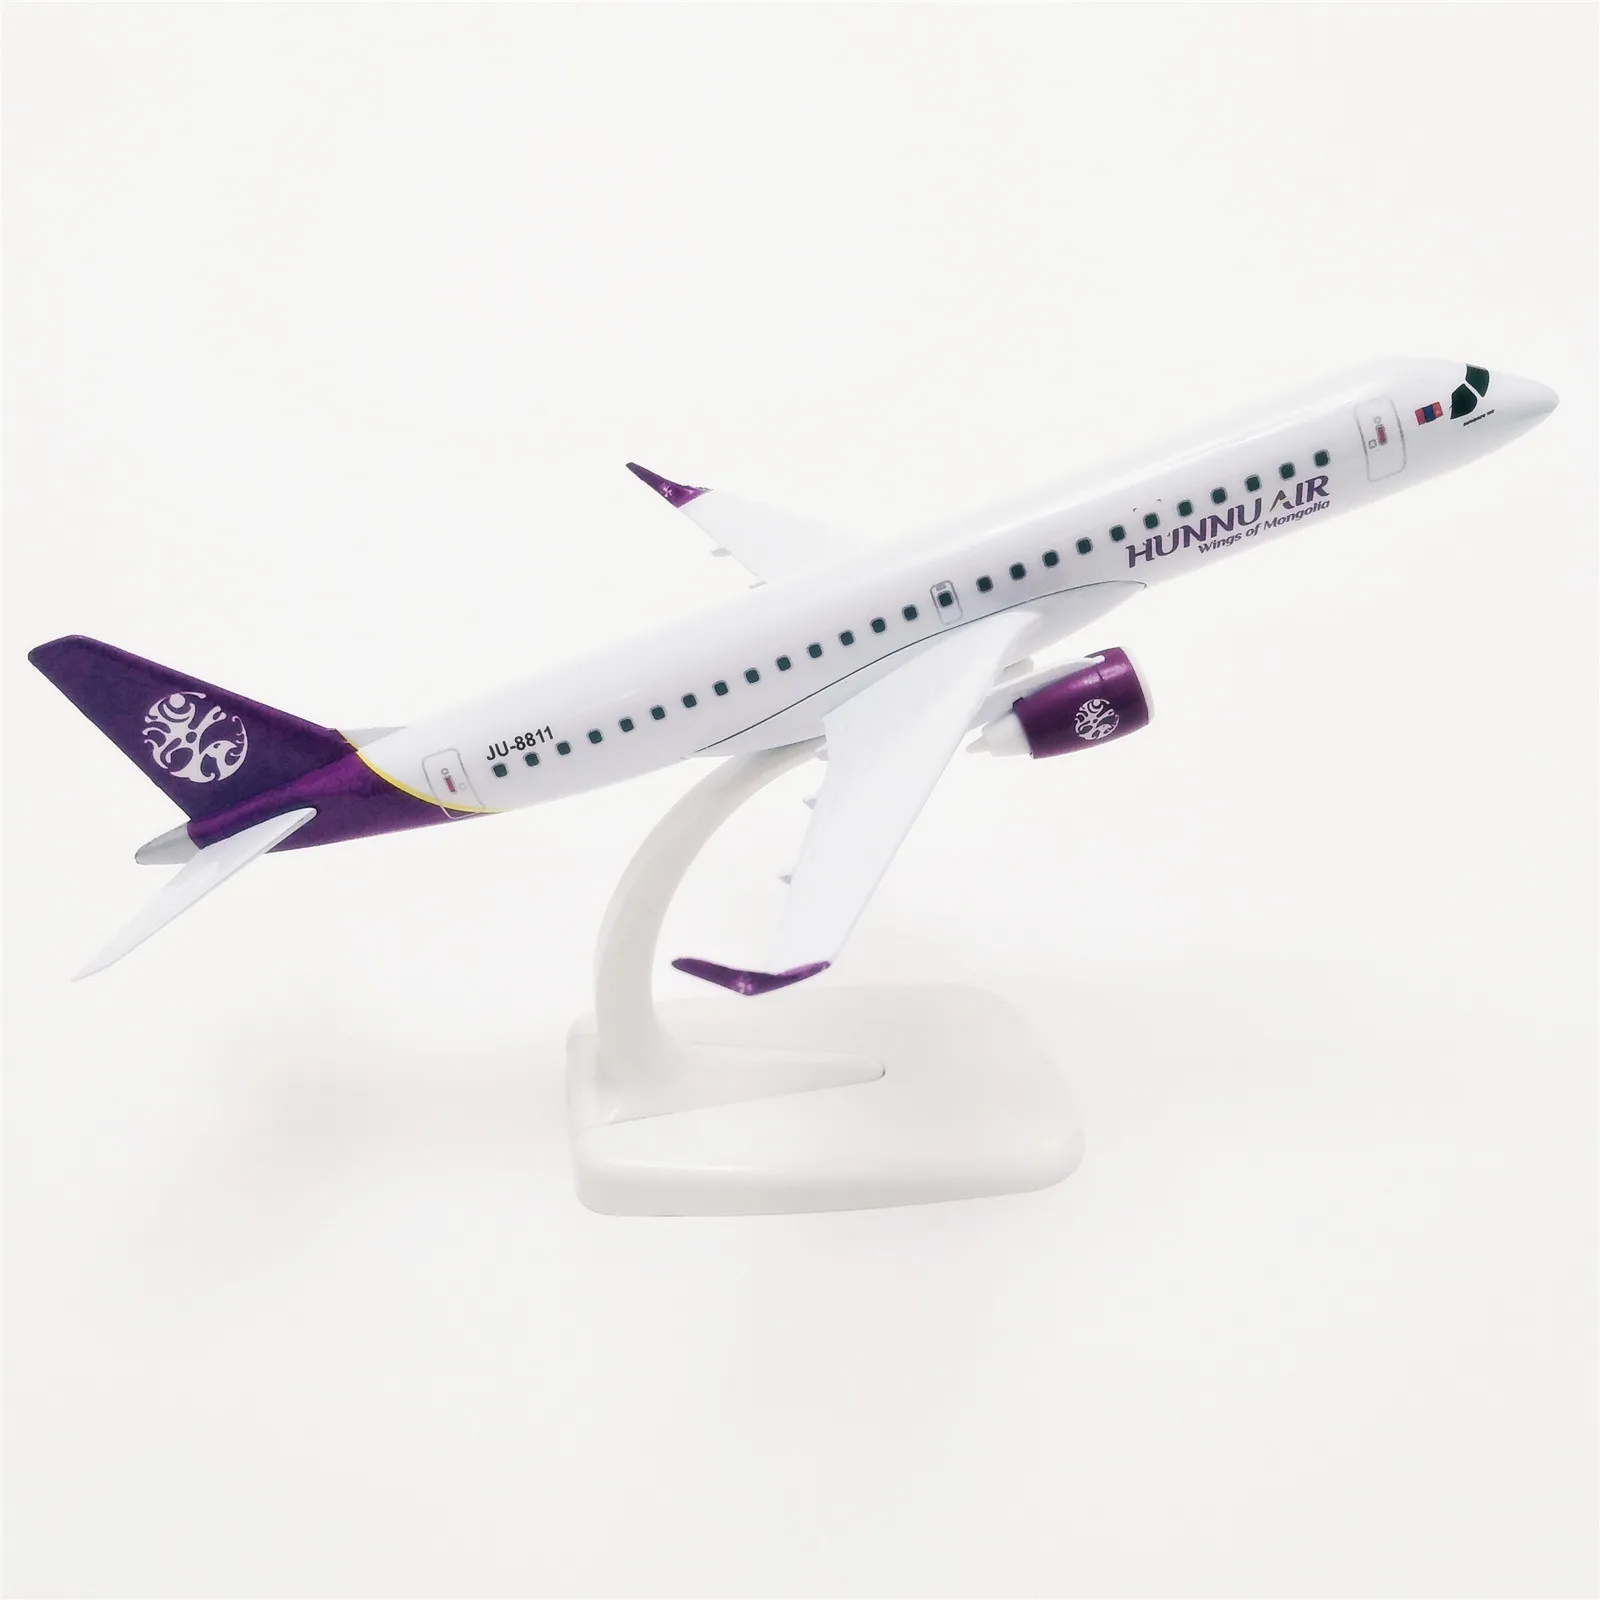 

20cm Metal Alloy Plane Model Mongolian Hunnu Air Embraer E-190 Airlines Airways Airplane Model w Stand Diecast Aircraft Gift